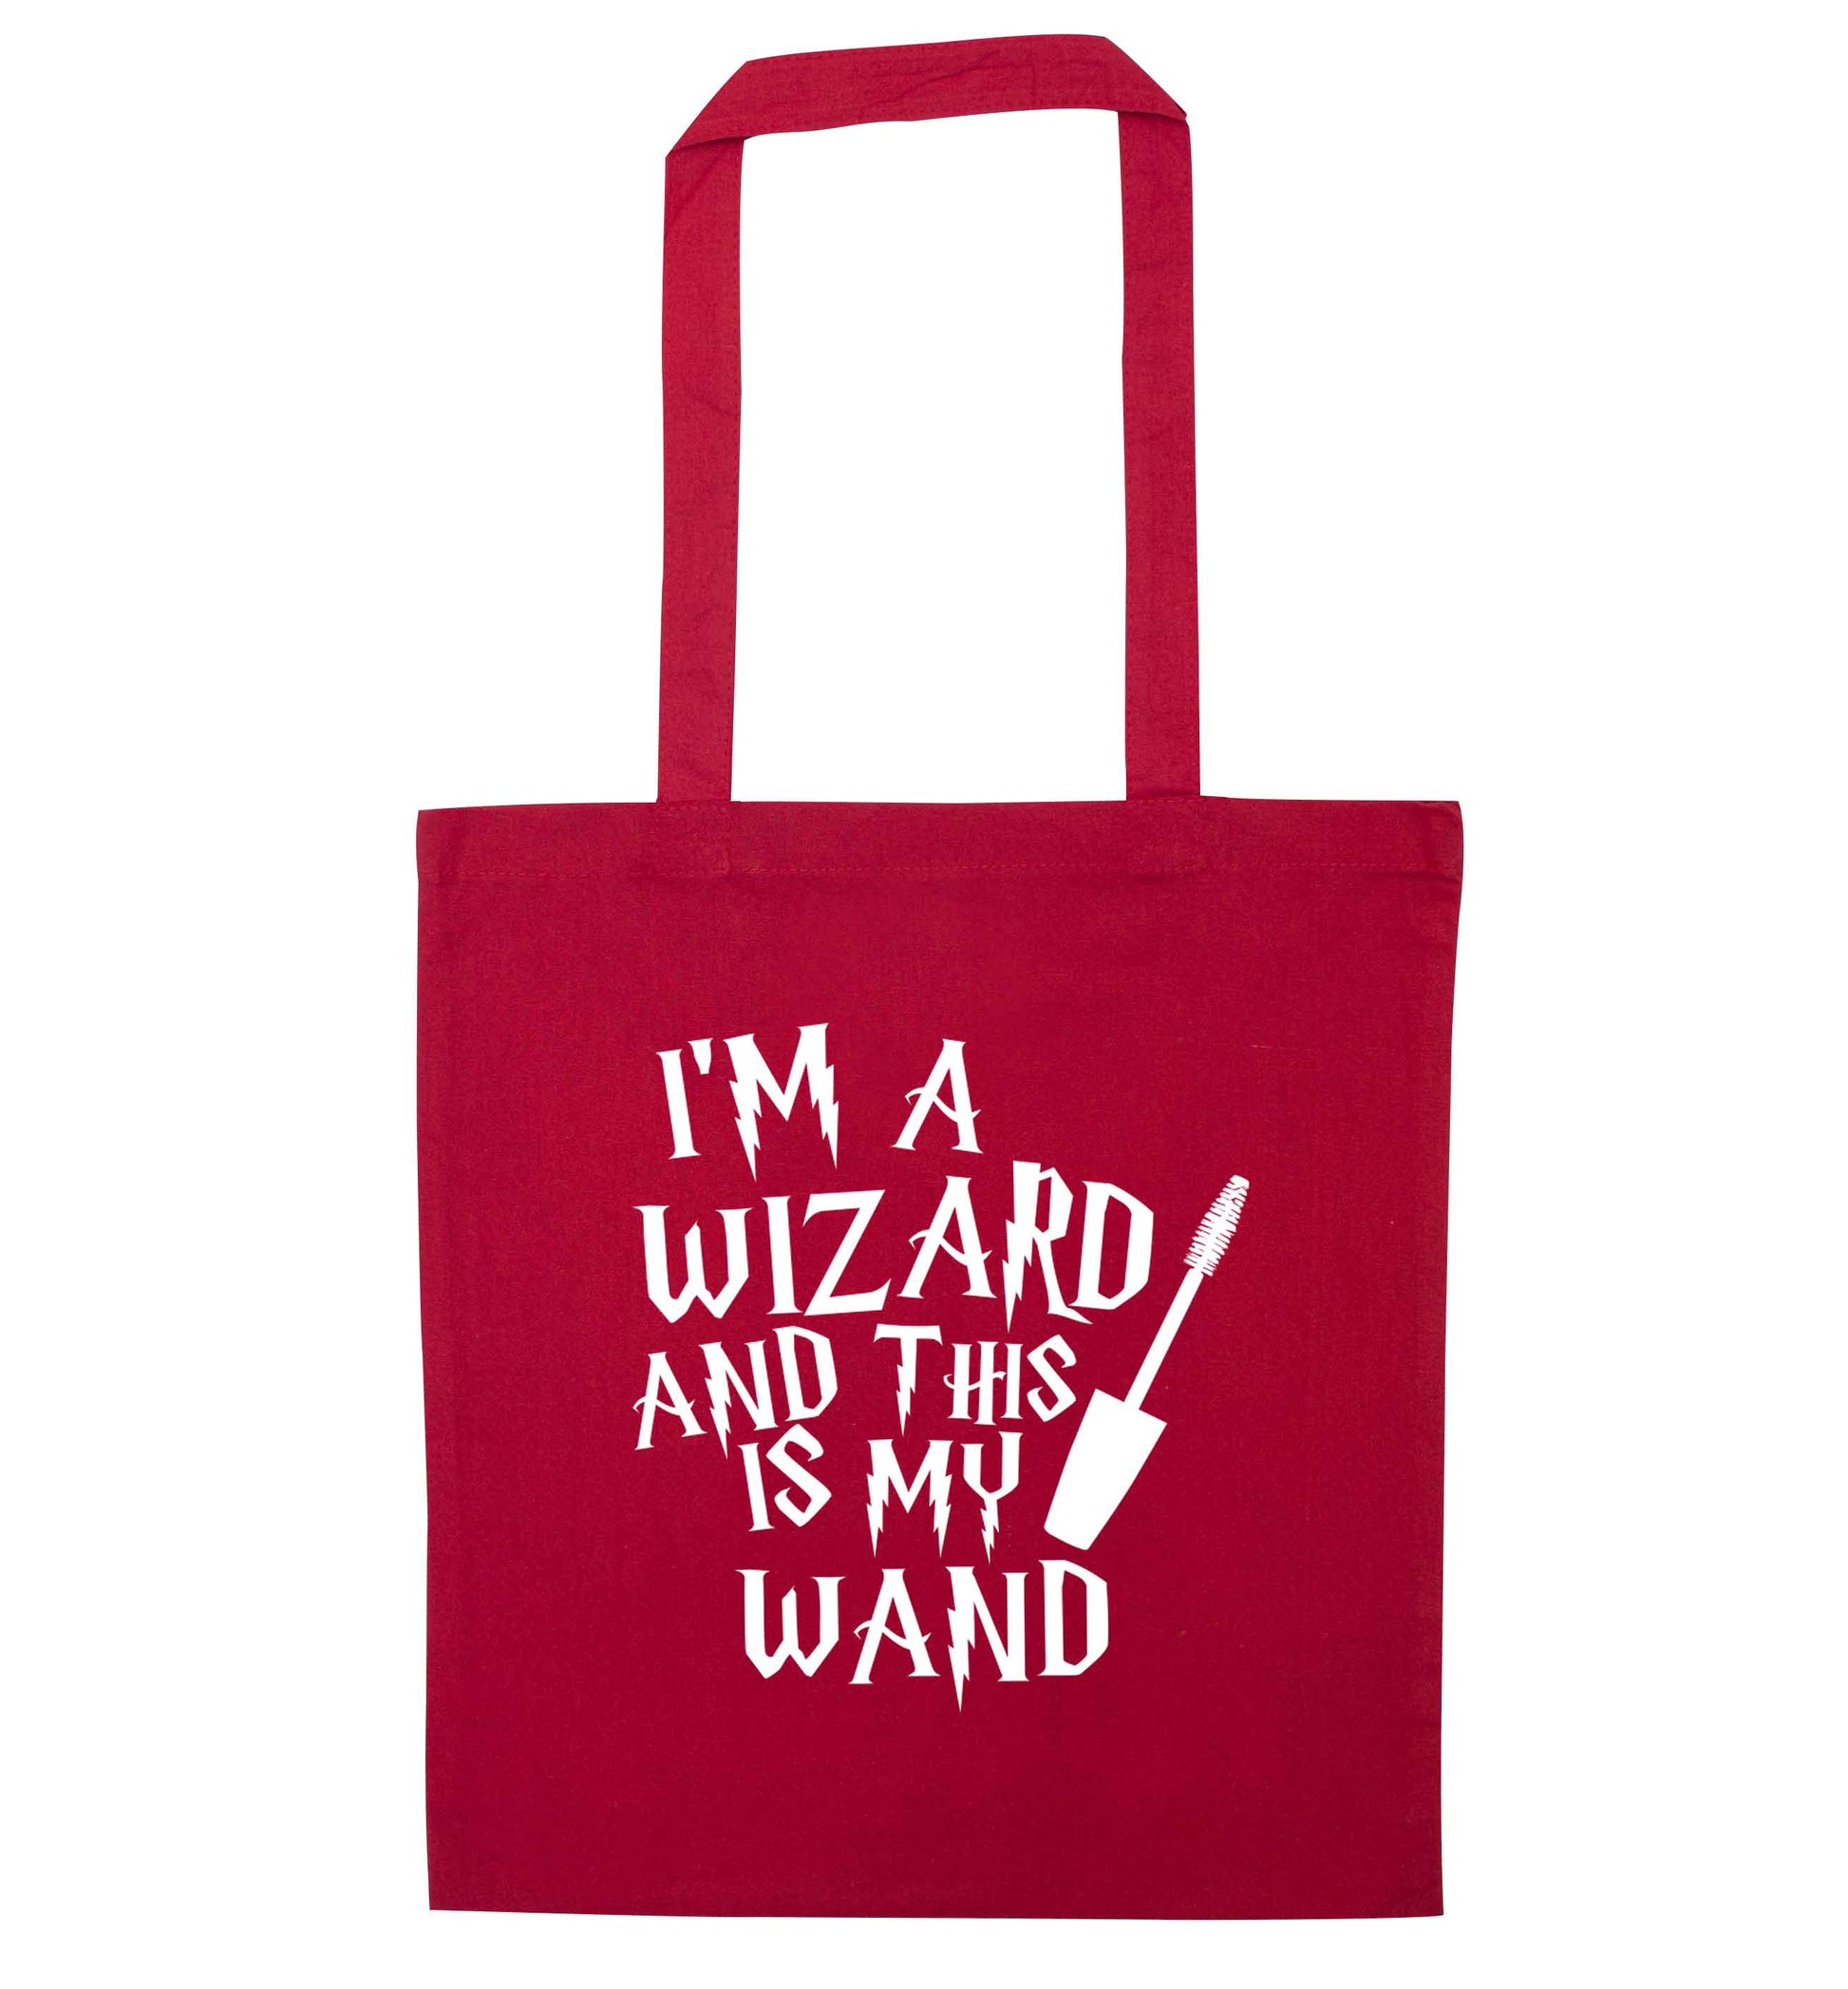 I'm a wizard and this is my wand red tote bag